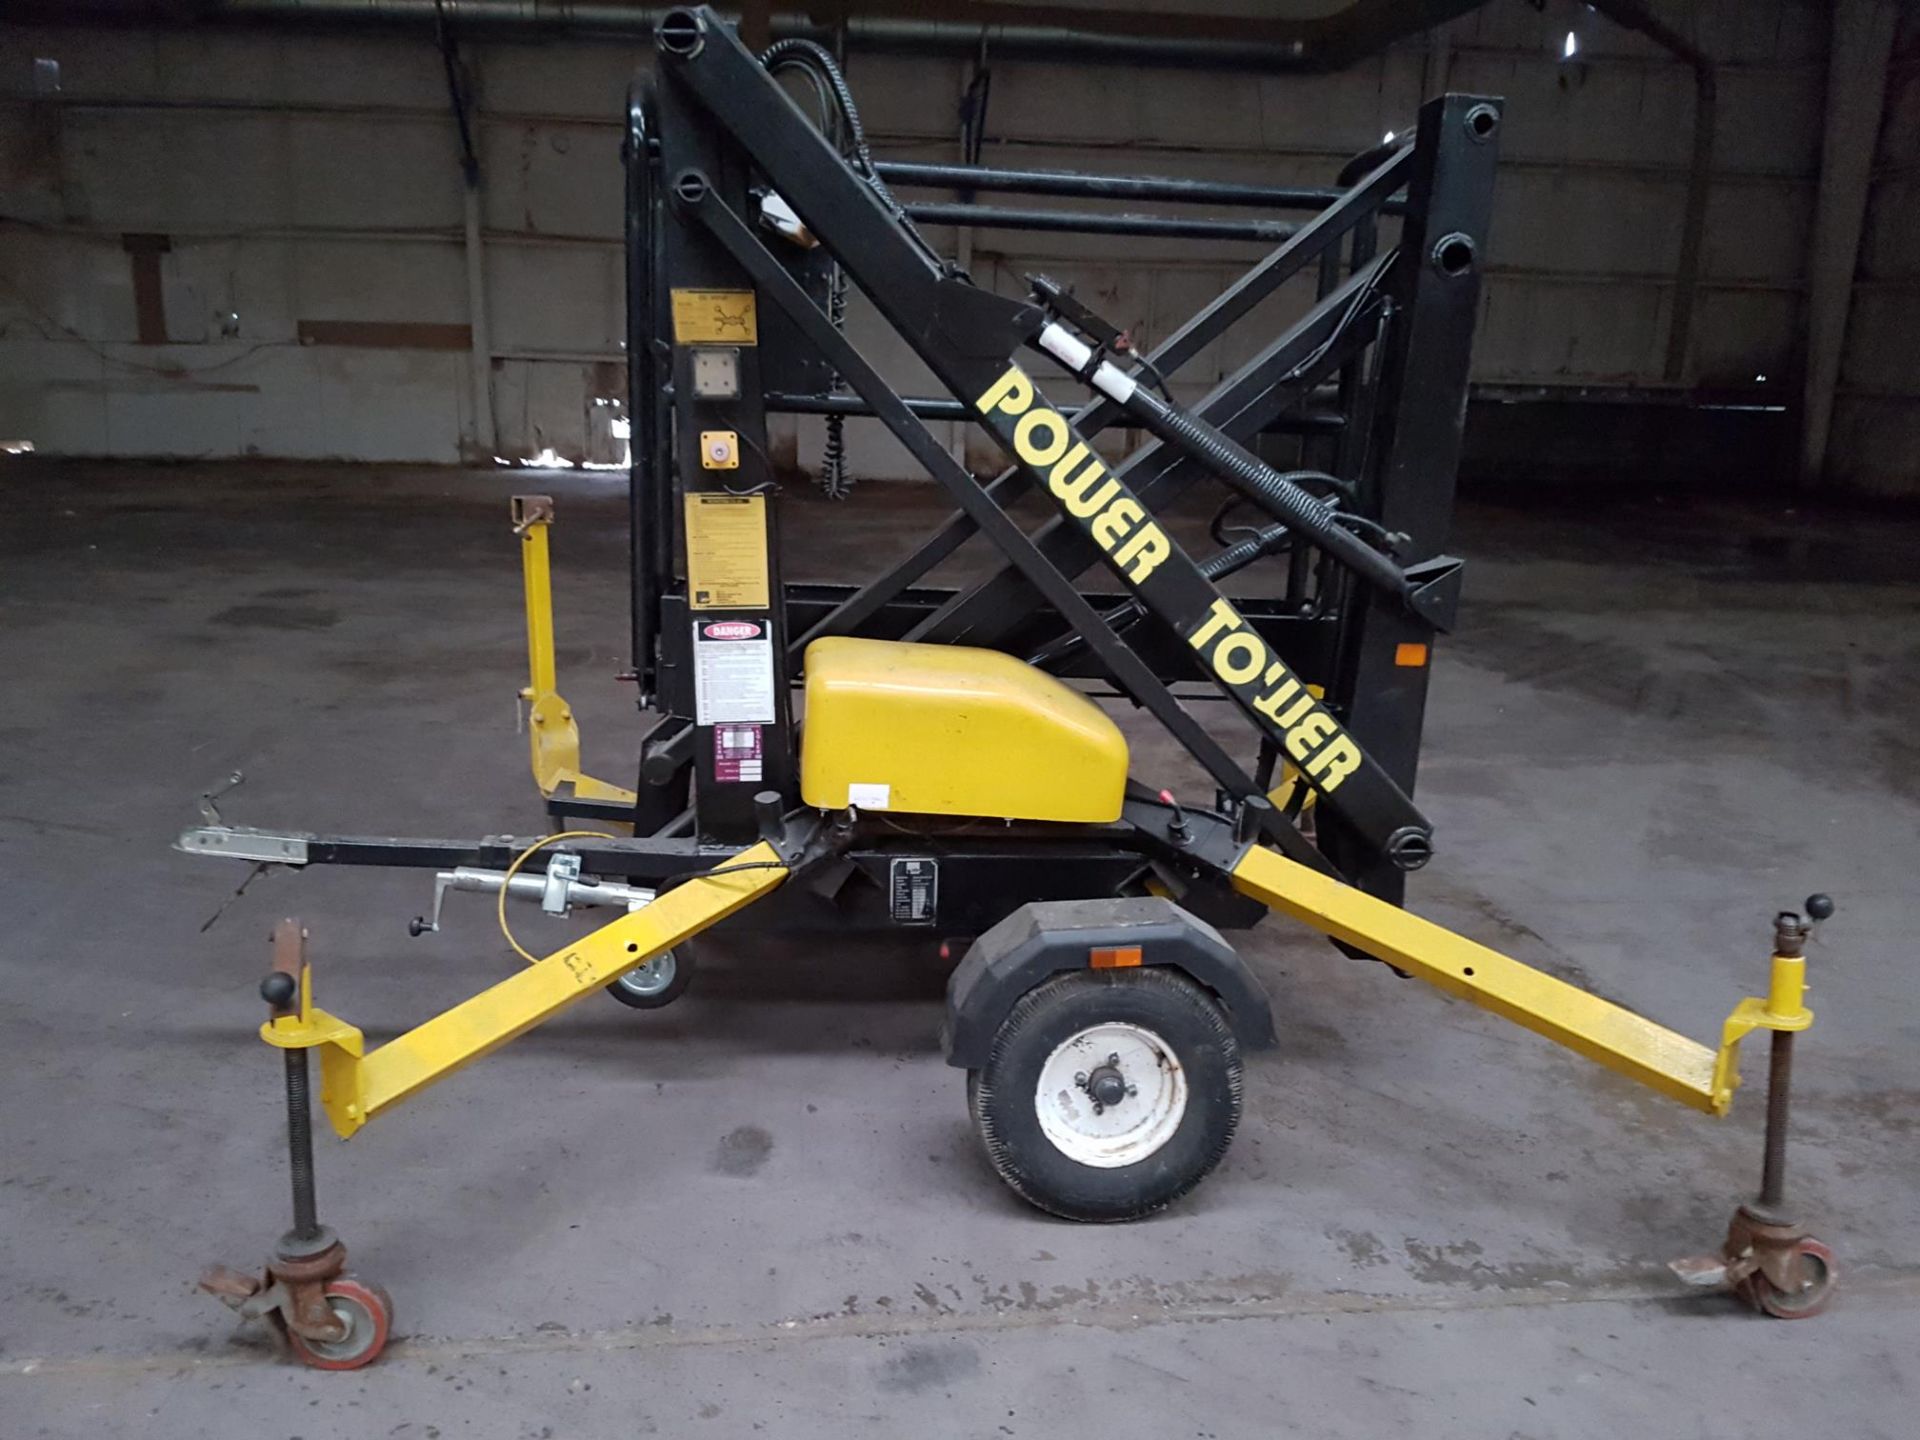 * Power Tower 110V Electric Boom Lift 1996 Class A1 Power Tower 110V Electric Boom Lift. S/N 0118,